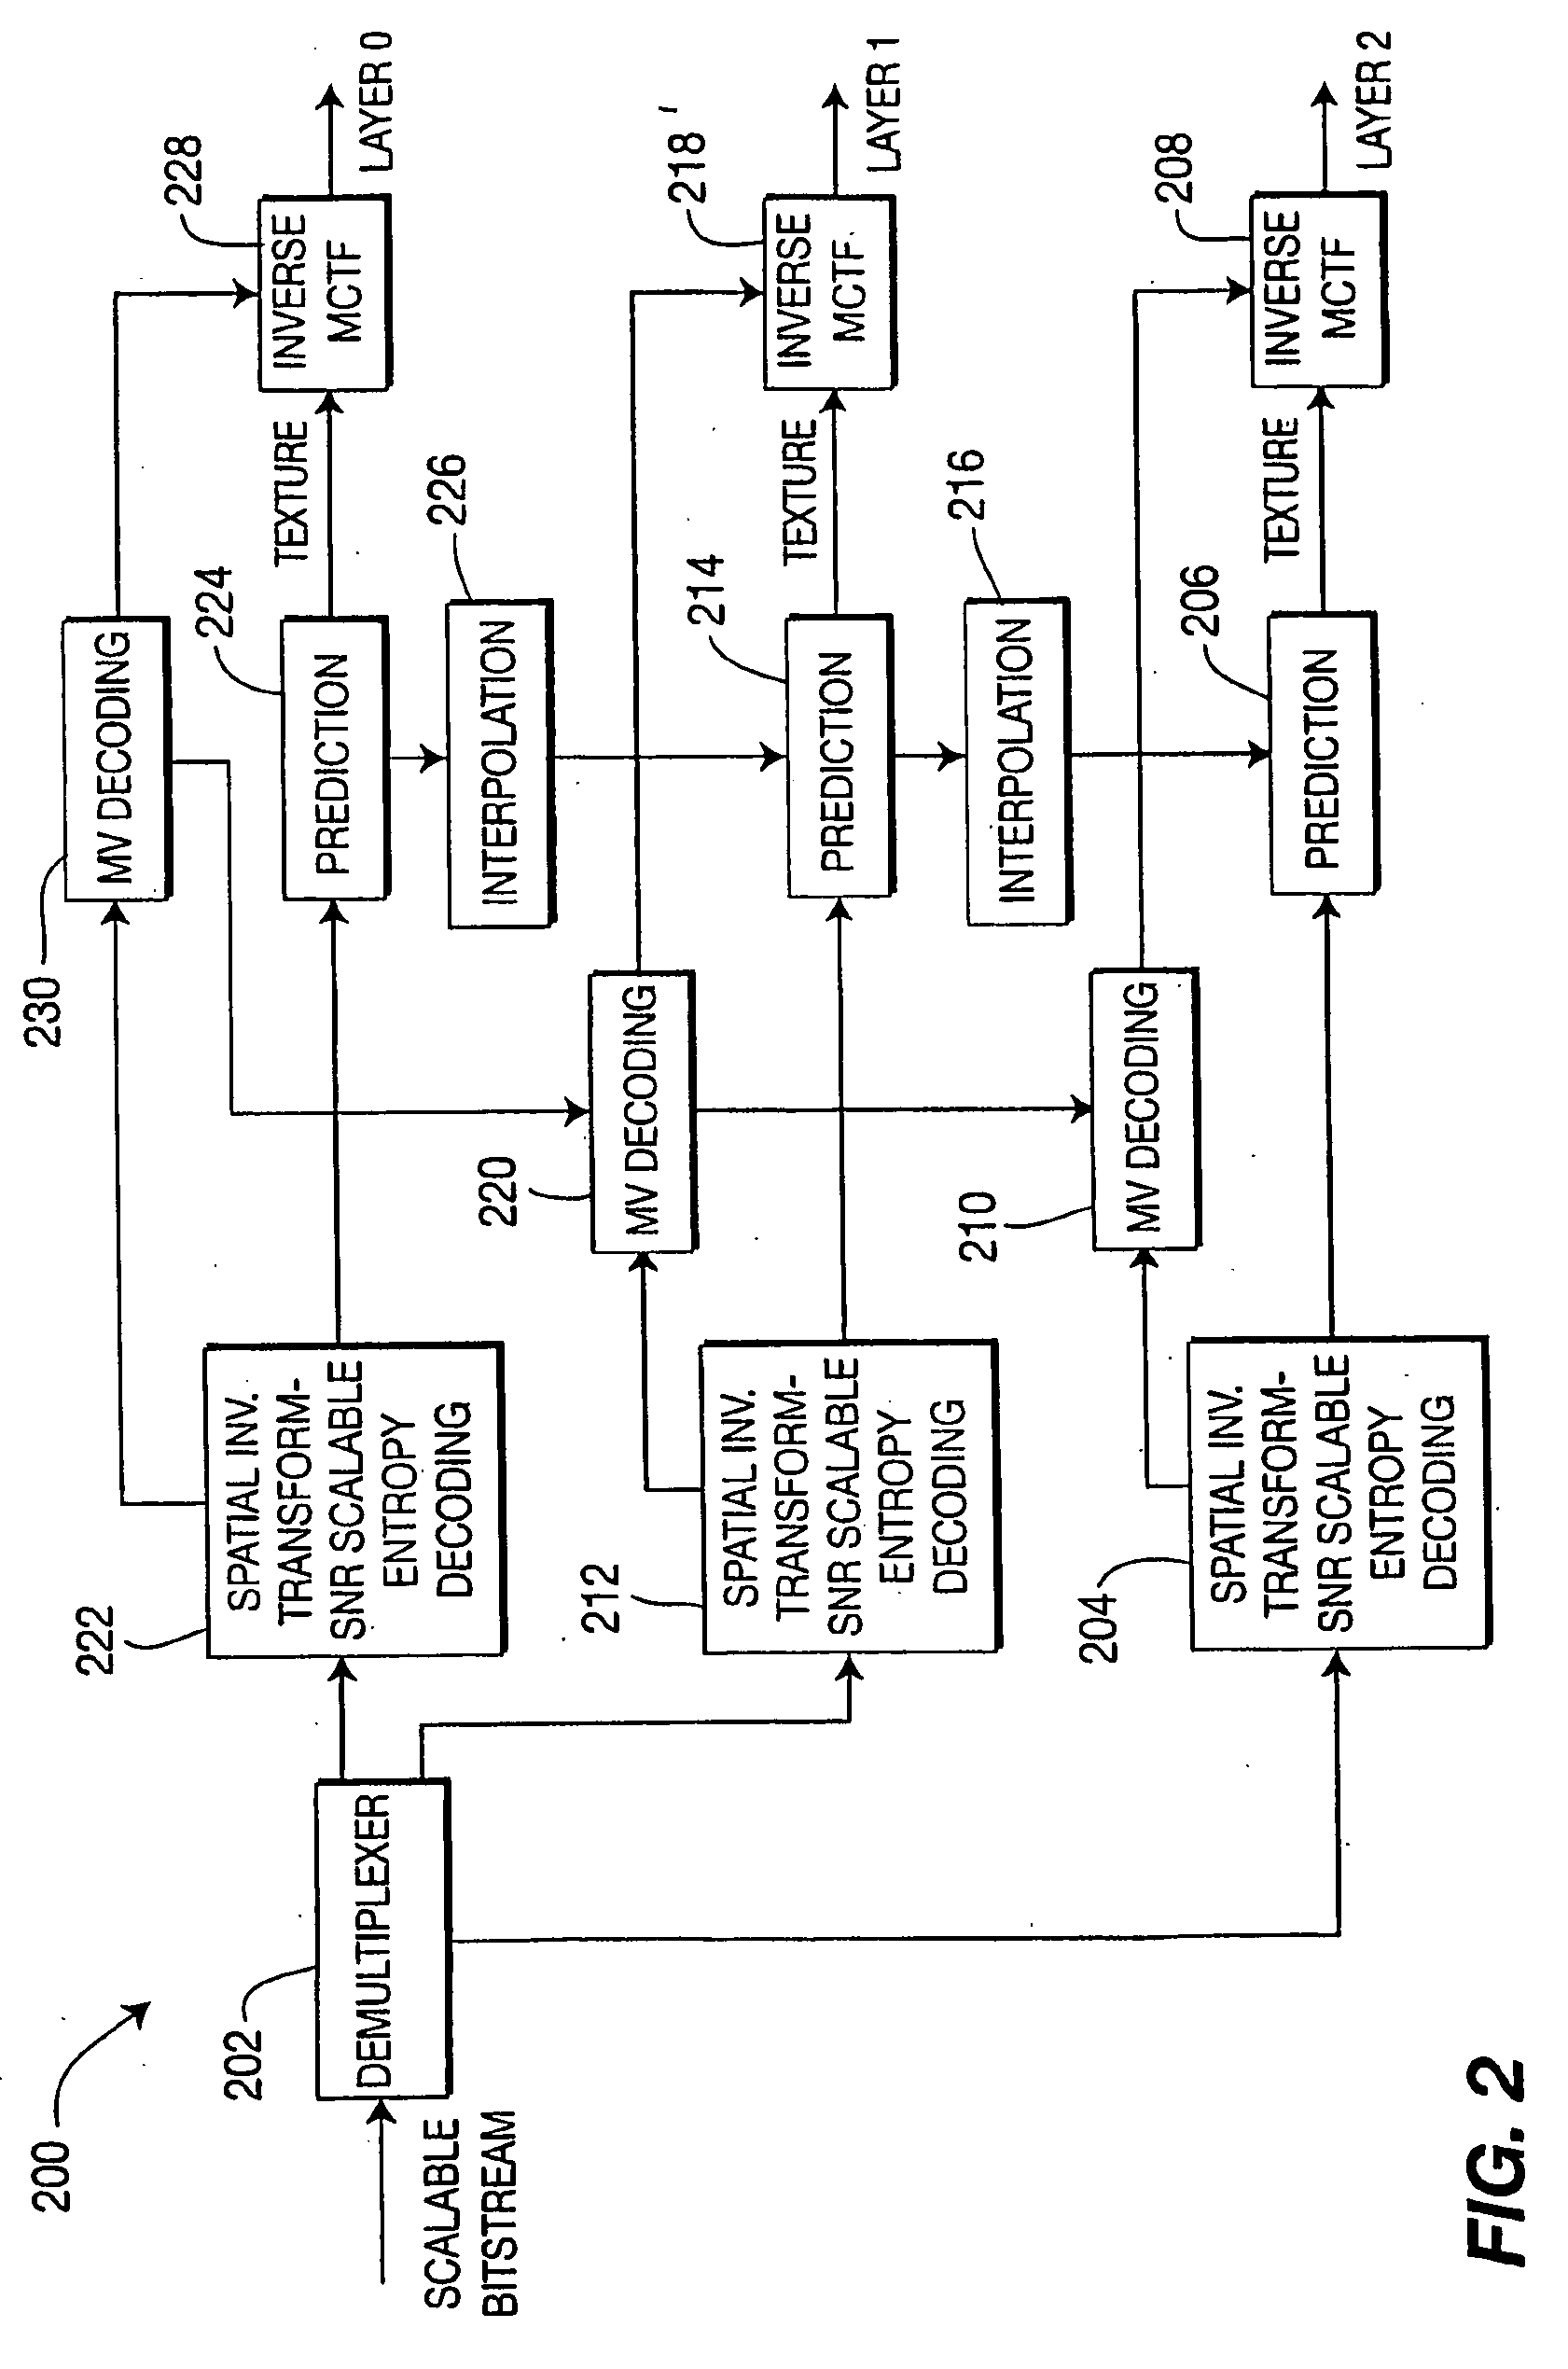 Method and Apparatus for Macroblock Adaptive Inter-Layer Intra Texture Prediction